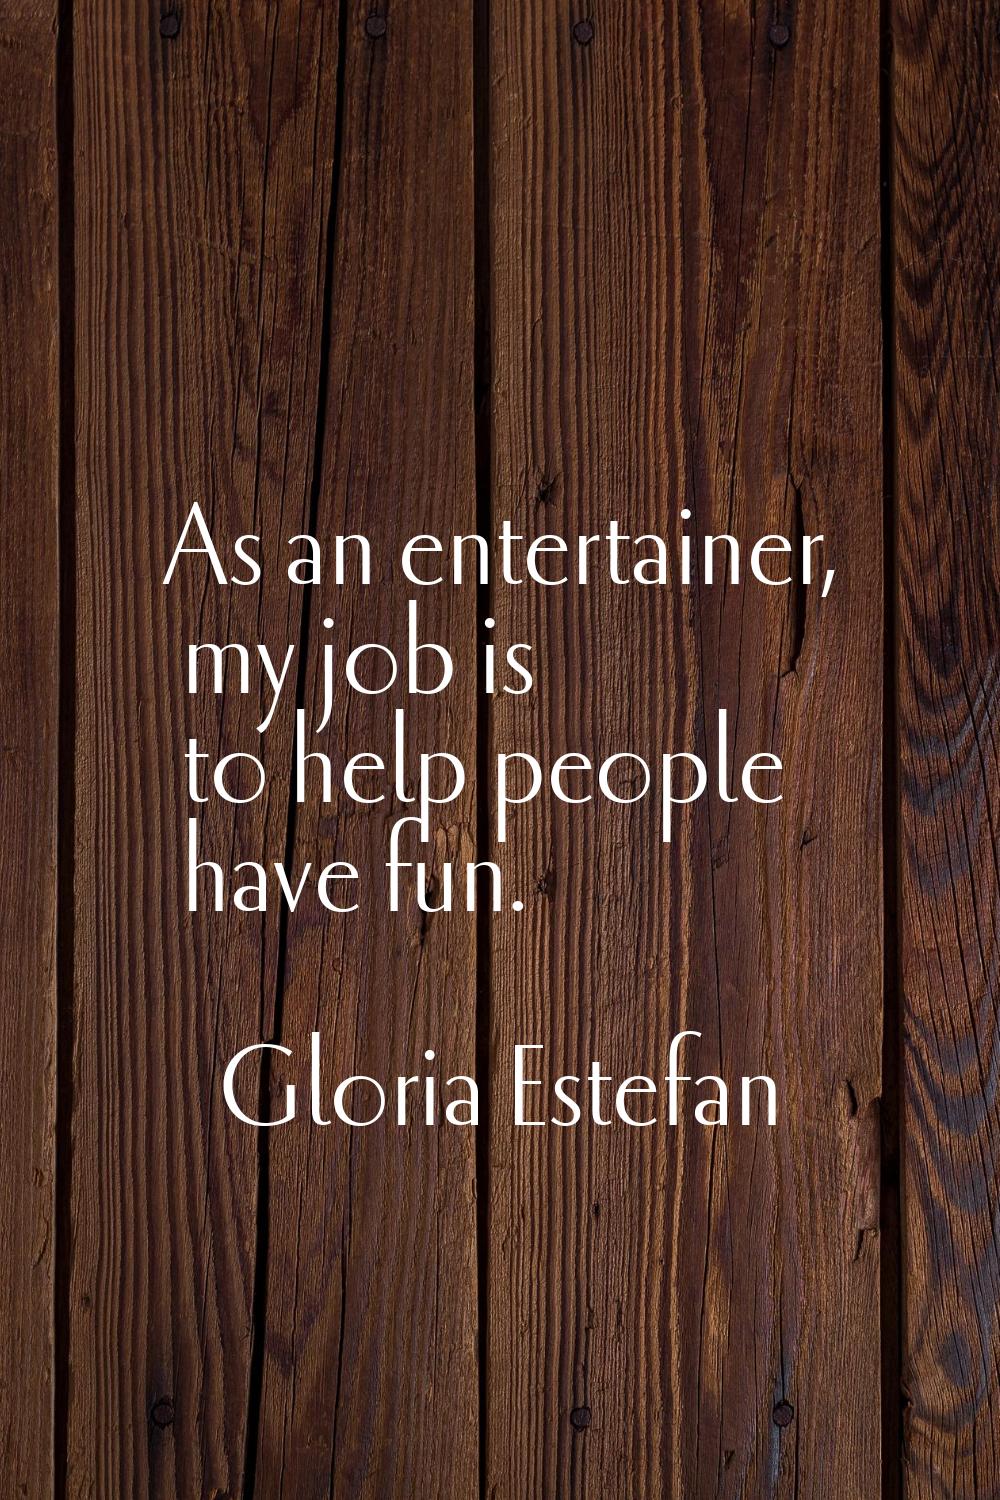 As an entertainer, my job is to help people have fun.